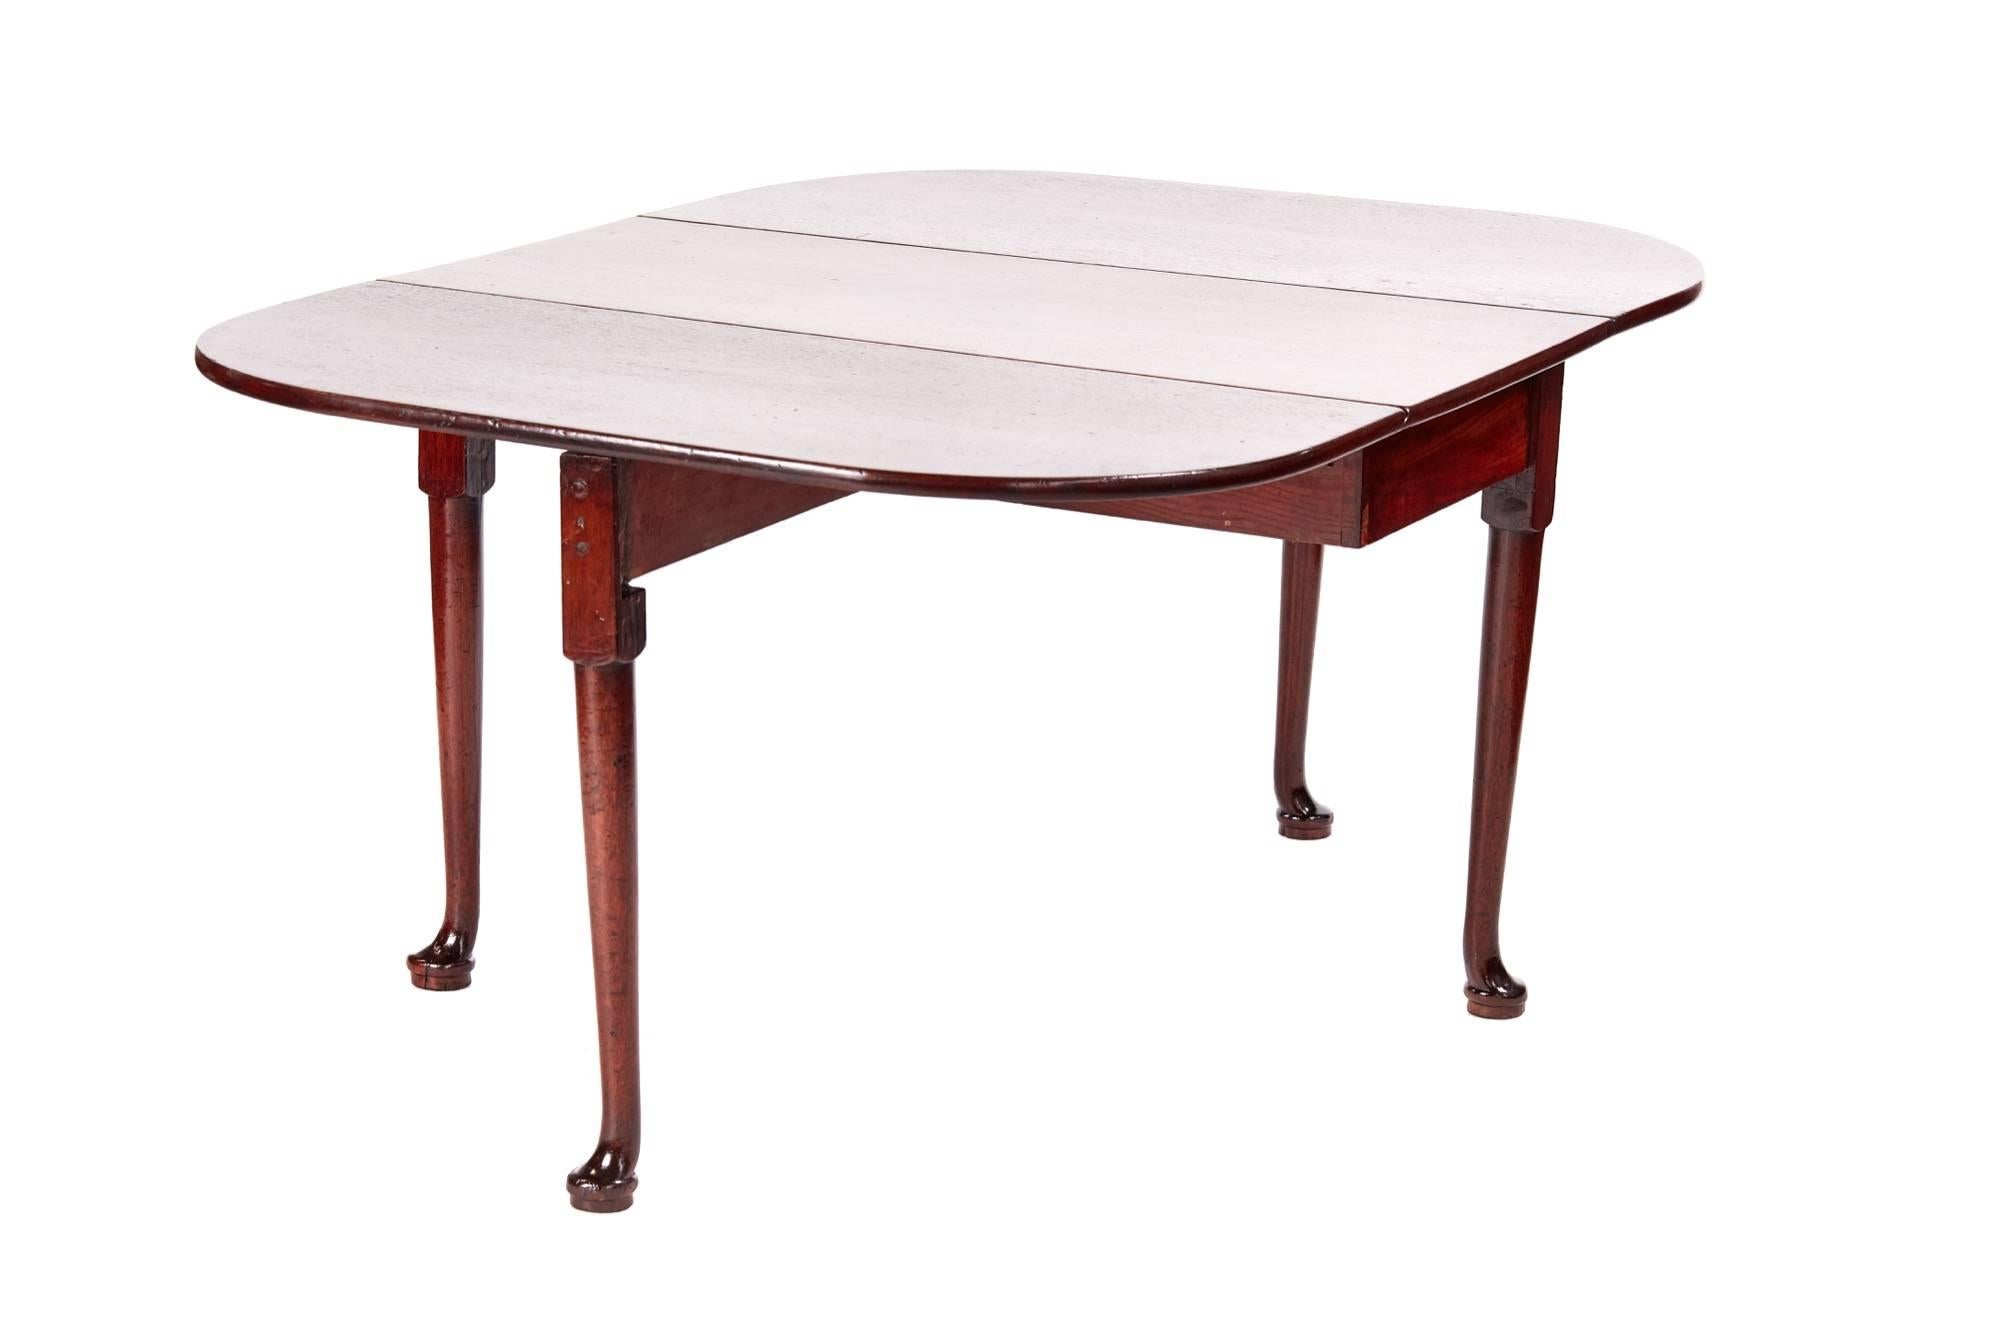 George III mahogany drop-leaf dining table, having a lovely quality solid mahogany top with two drop leaves, supported by turned legs with pad feet
Lovely color and condition
Measures: Closed 44